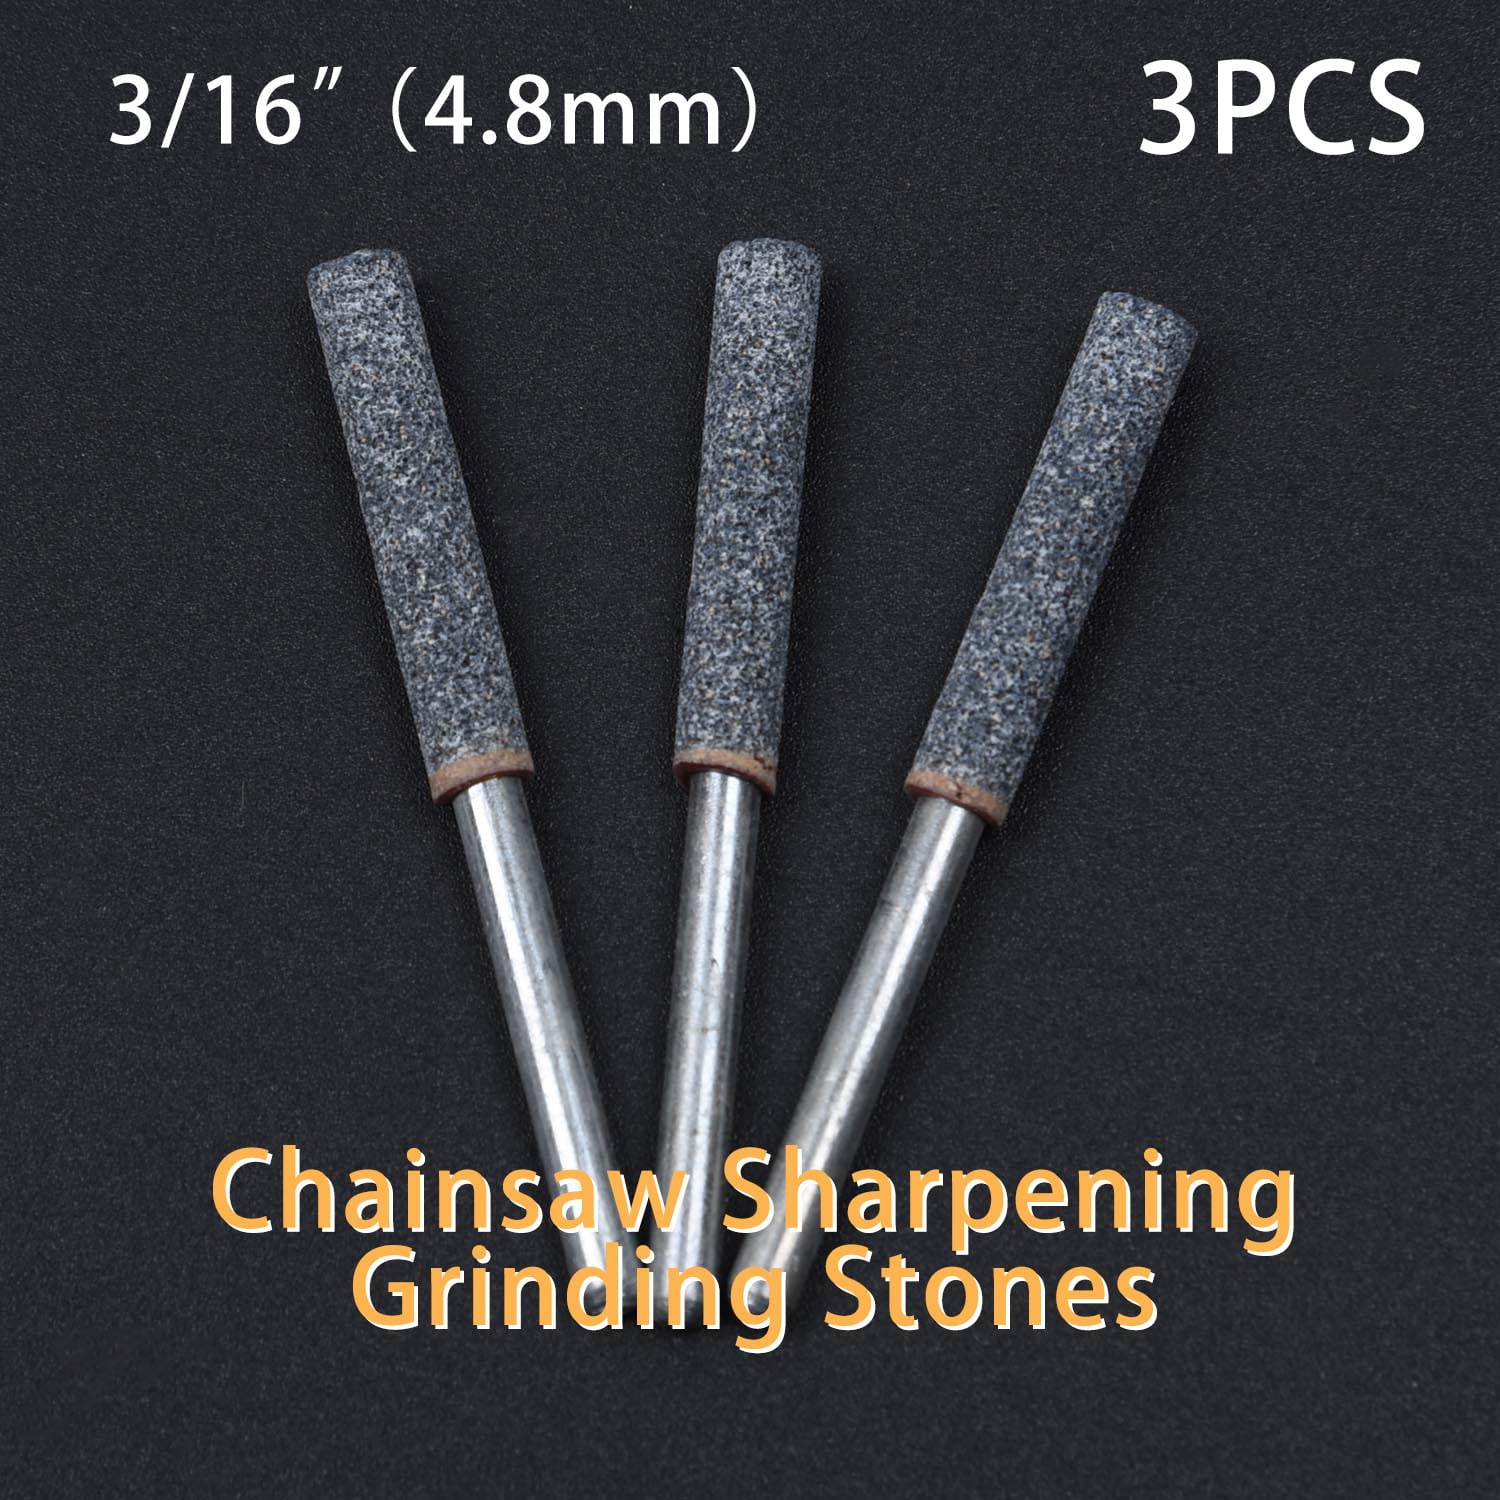 3pcs 4.8mm Chainsaw Saw Chain Files Filing Sharpener For Woodworking Top Quality 